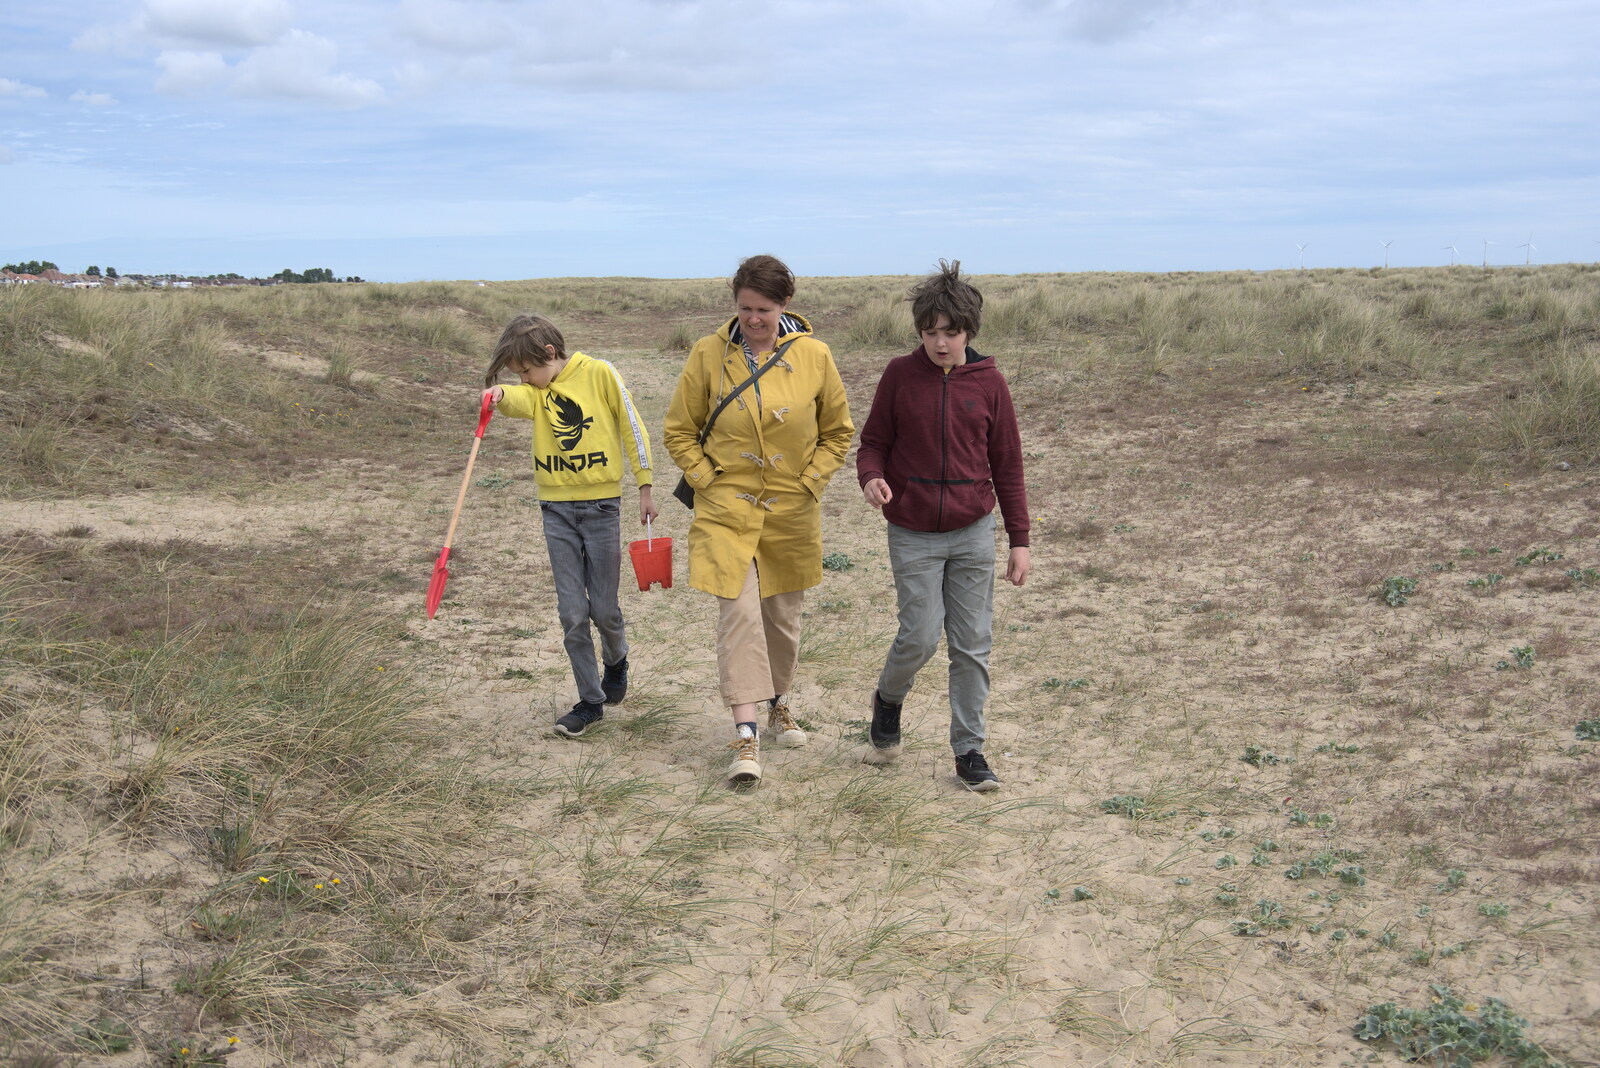 Harry, Isobel and Fred in the dunes from Faded Seaside Glamour: A Weekend in Great Yarmouth, Norfolk - 29th May 2022